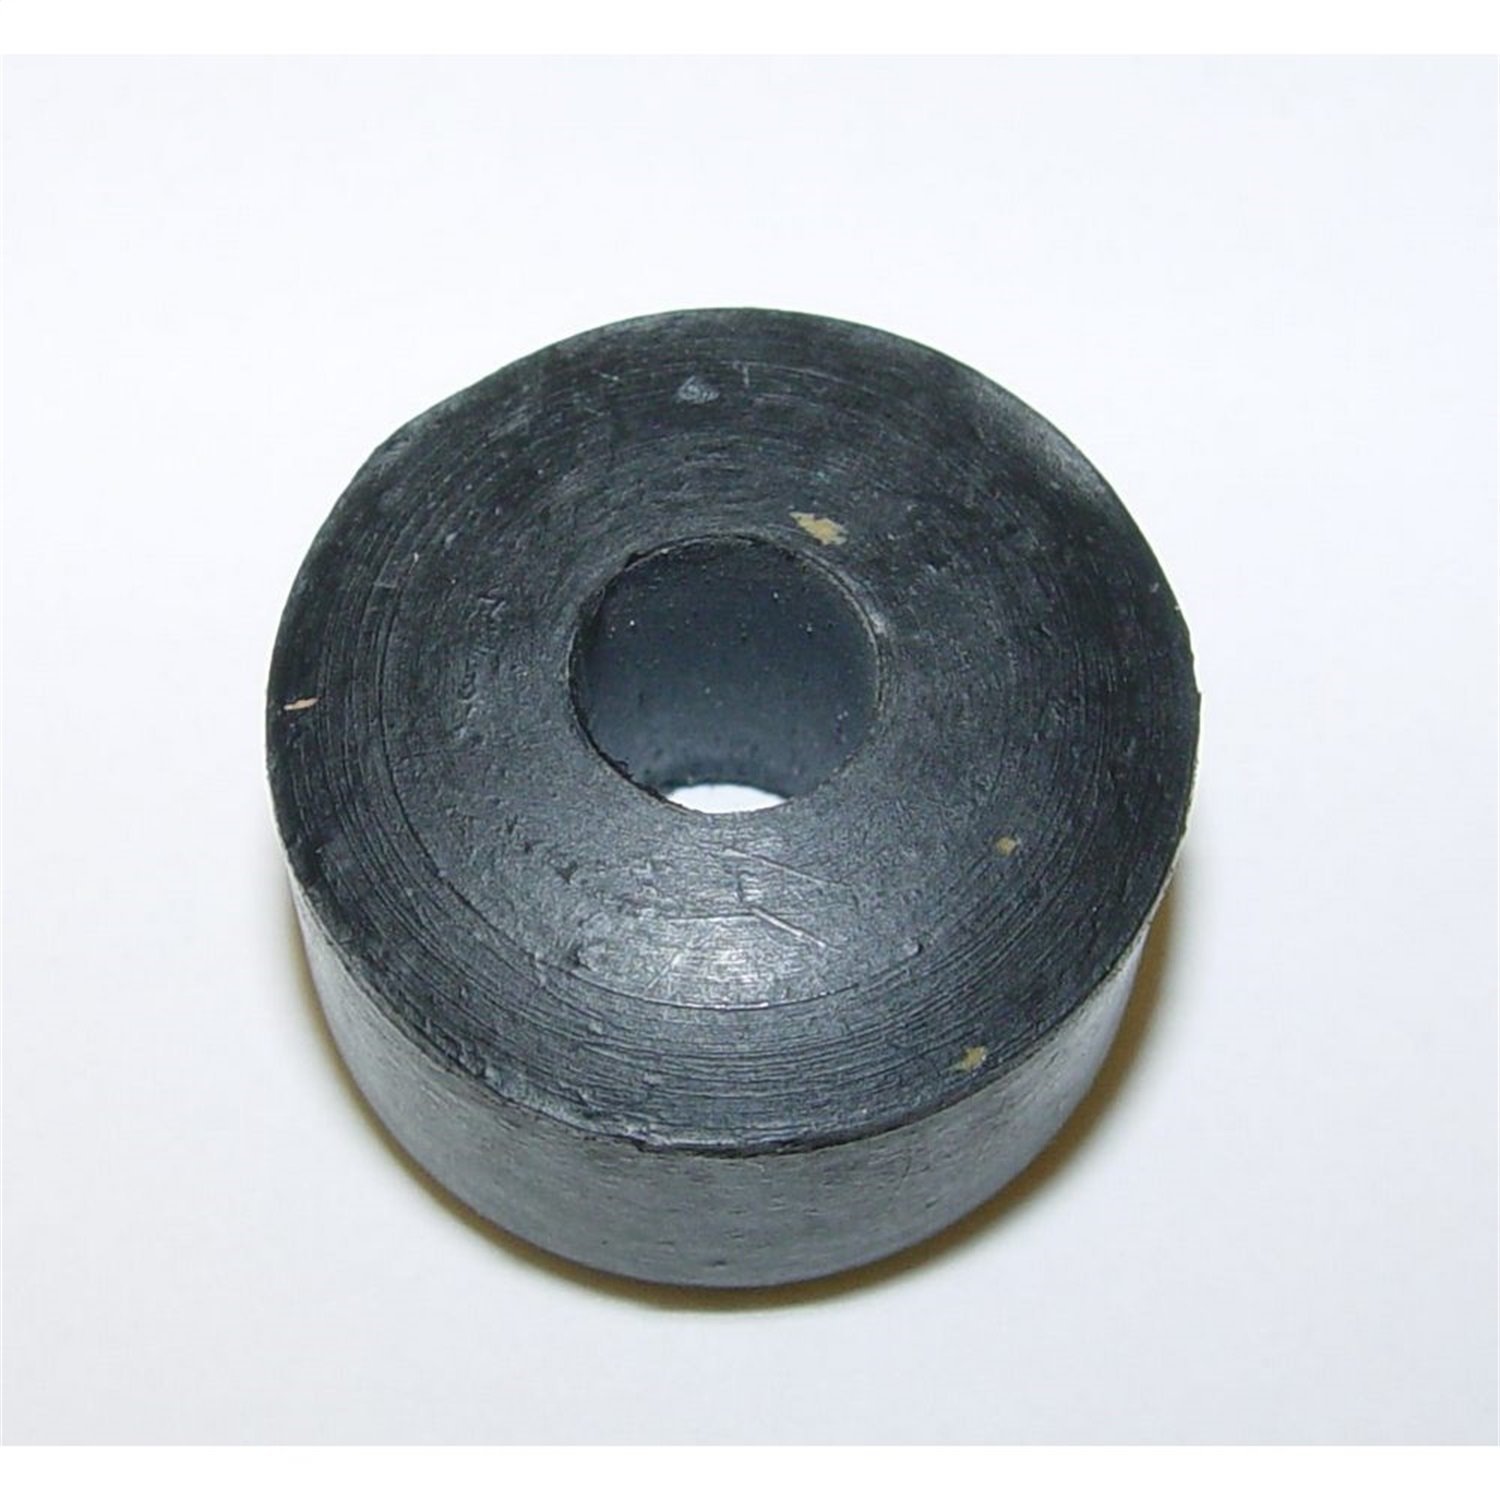 This factory-style shock mount bushing from Omix-ADA fits 84-01 Jeep Cherokee XJ and 87-95 Wrangler YJ .